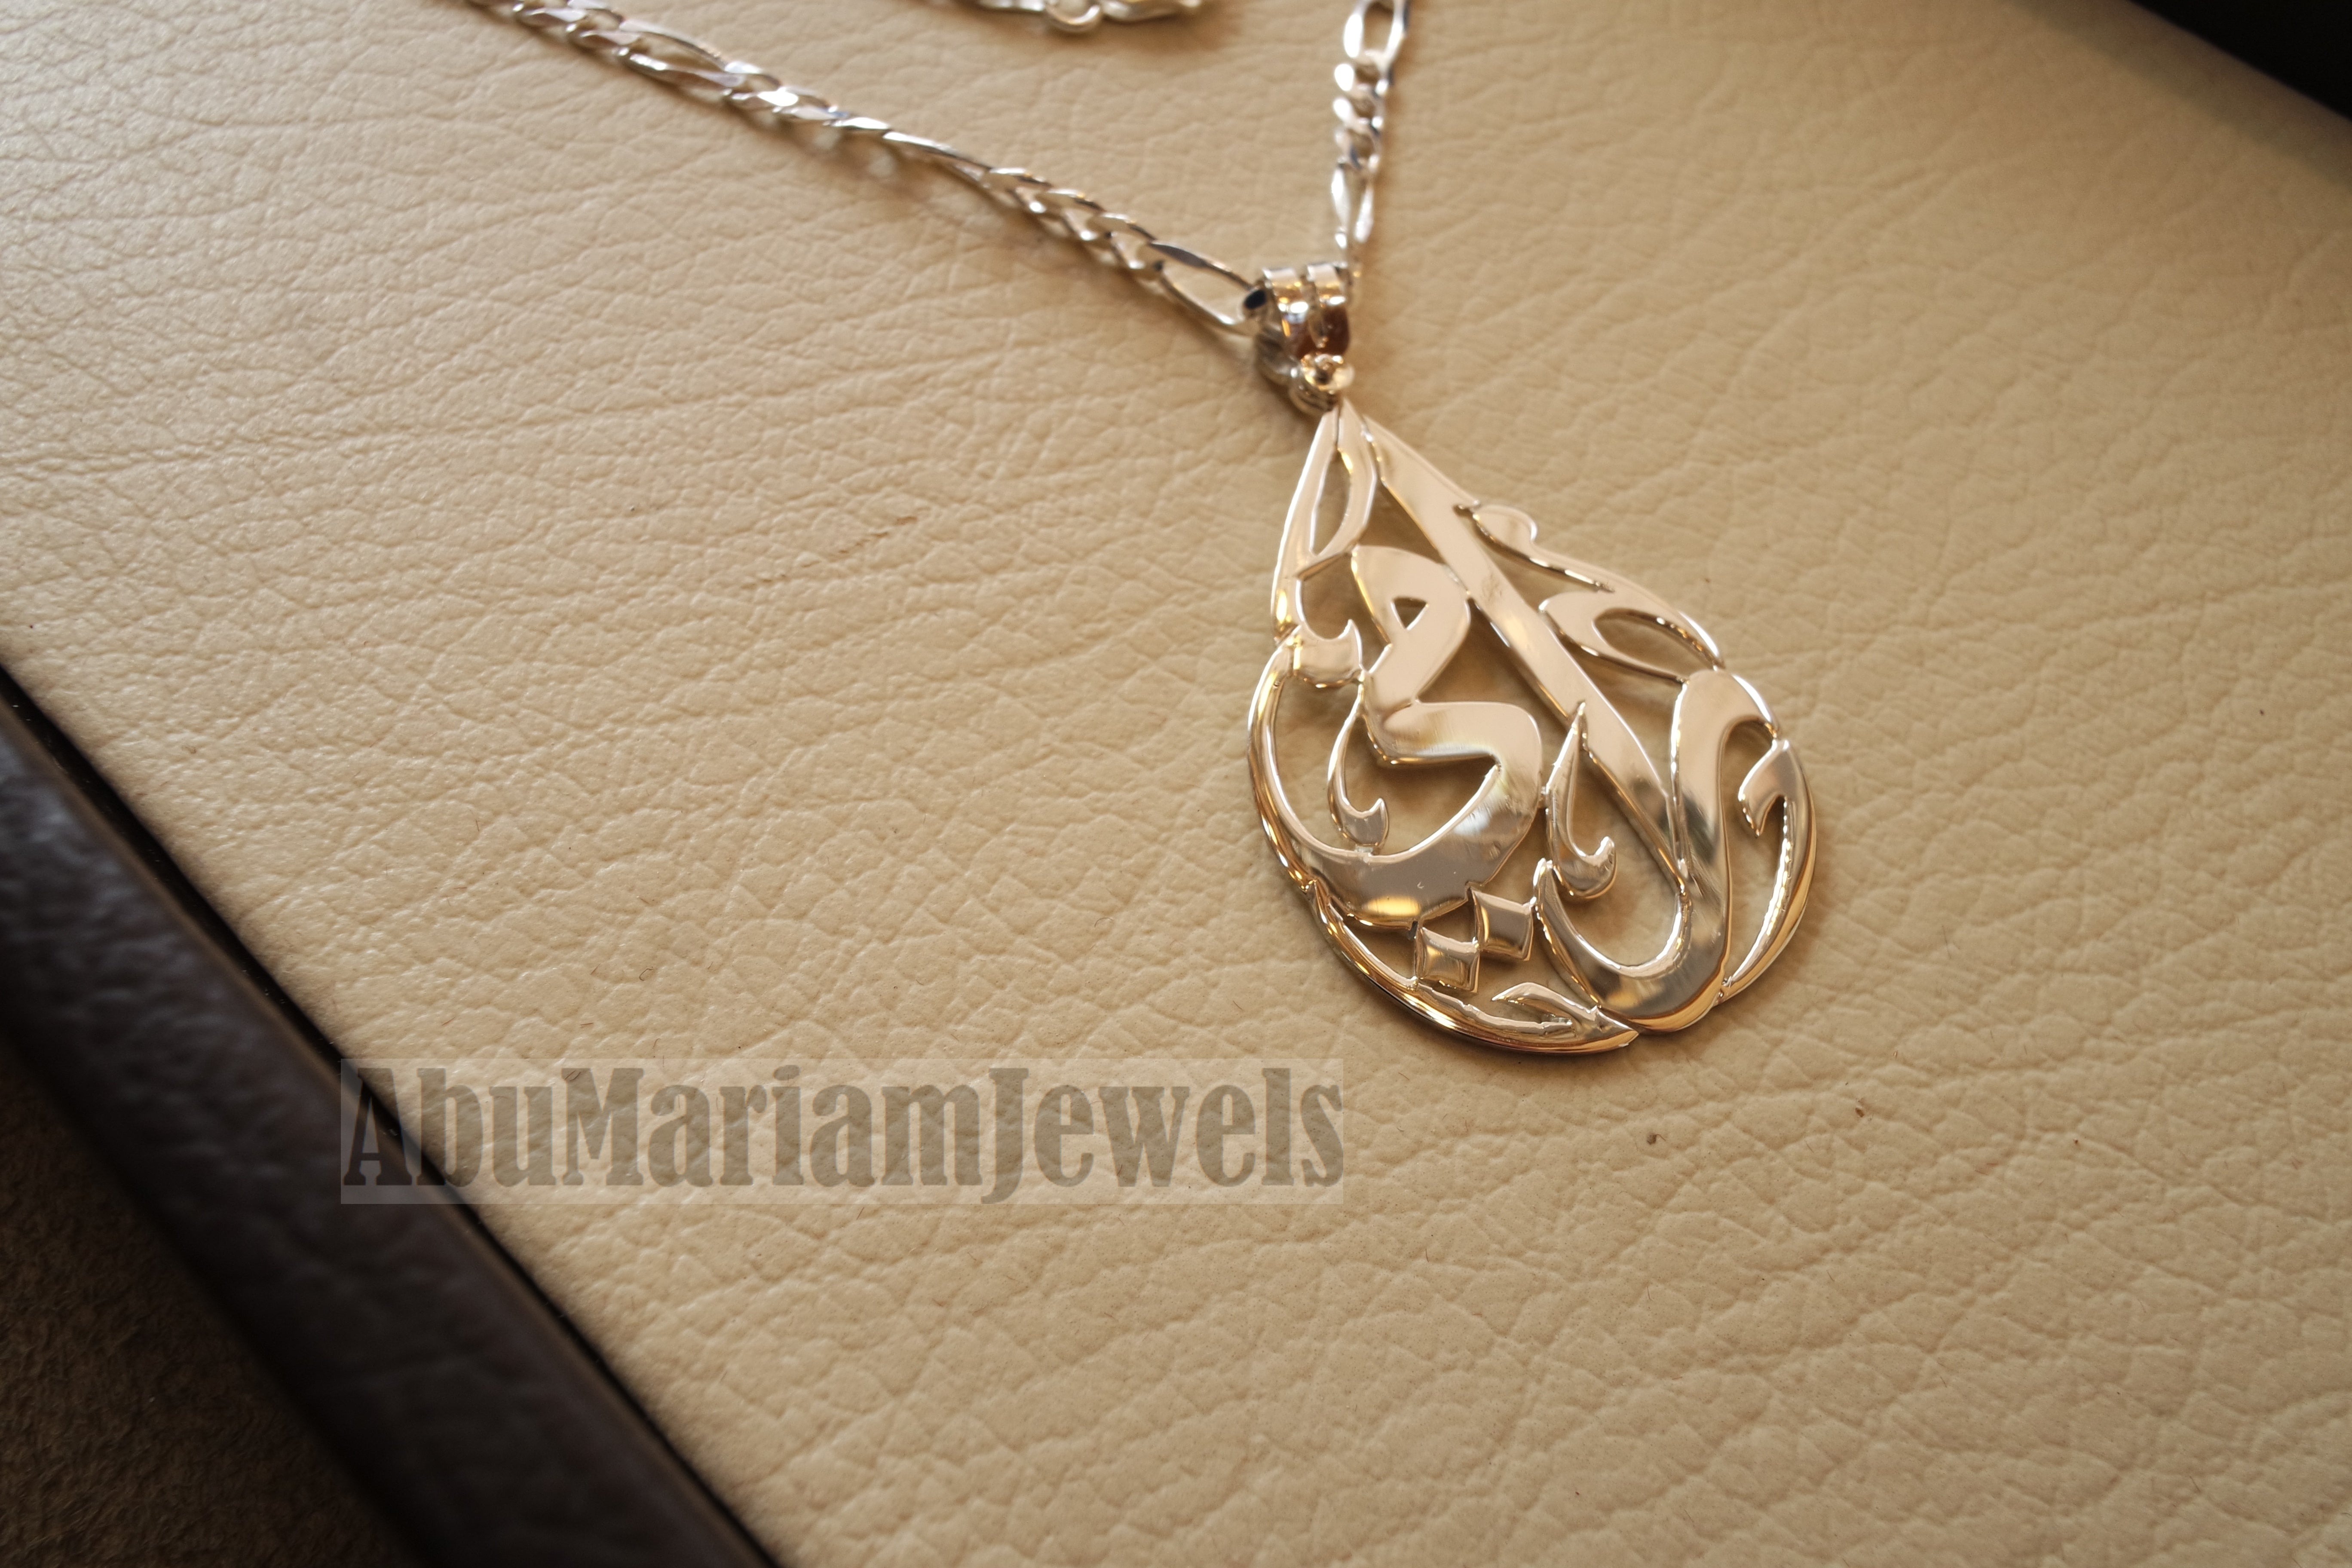 pendant with thick chain one or two names arabic made to order customized polish sterling silver 925 high quality big pear shape تعليقه اسماء عربي